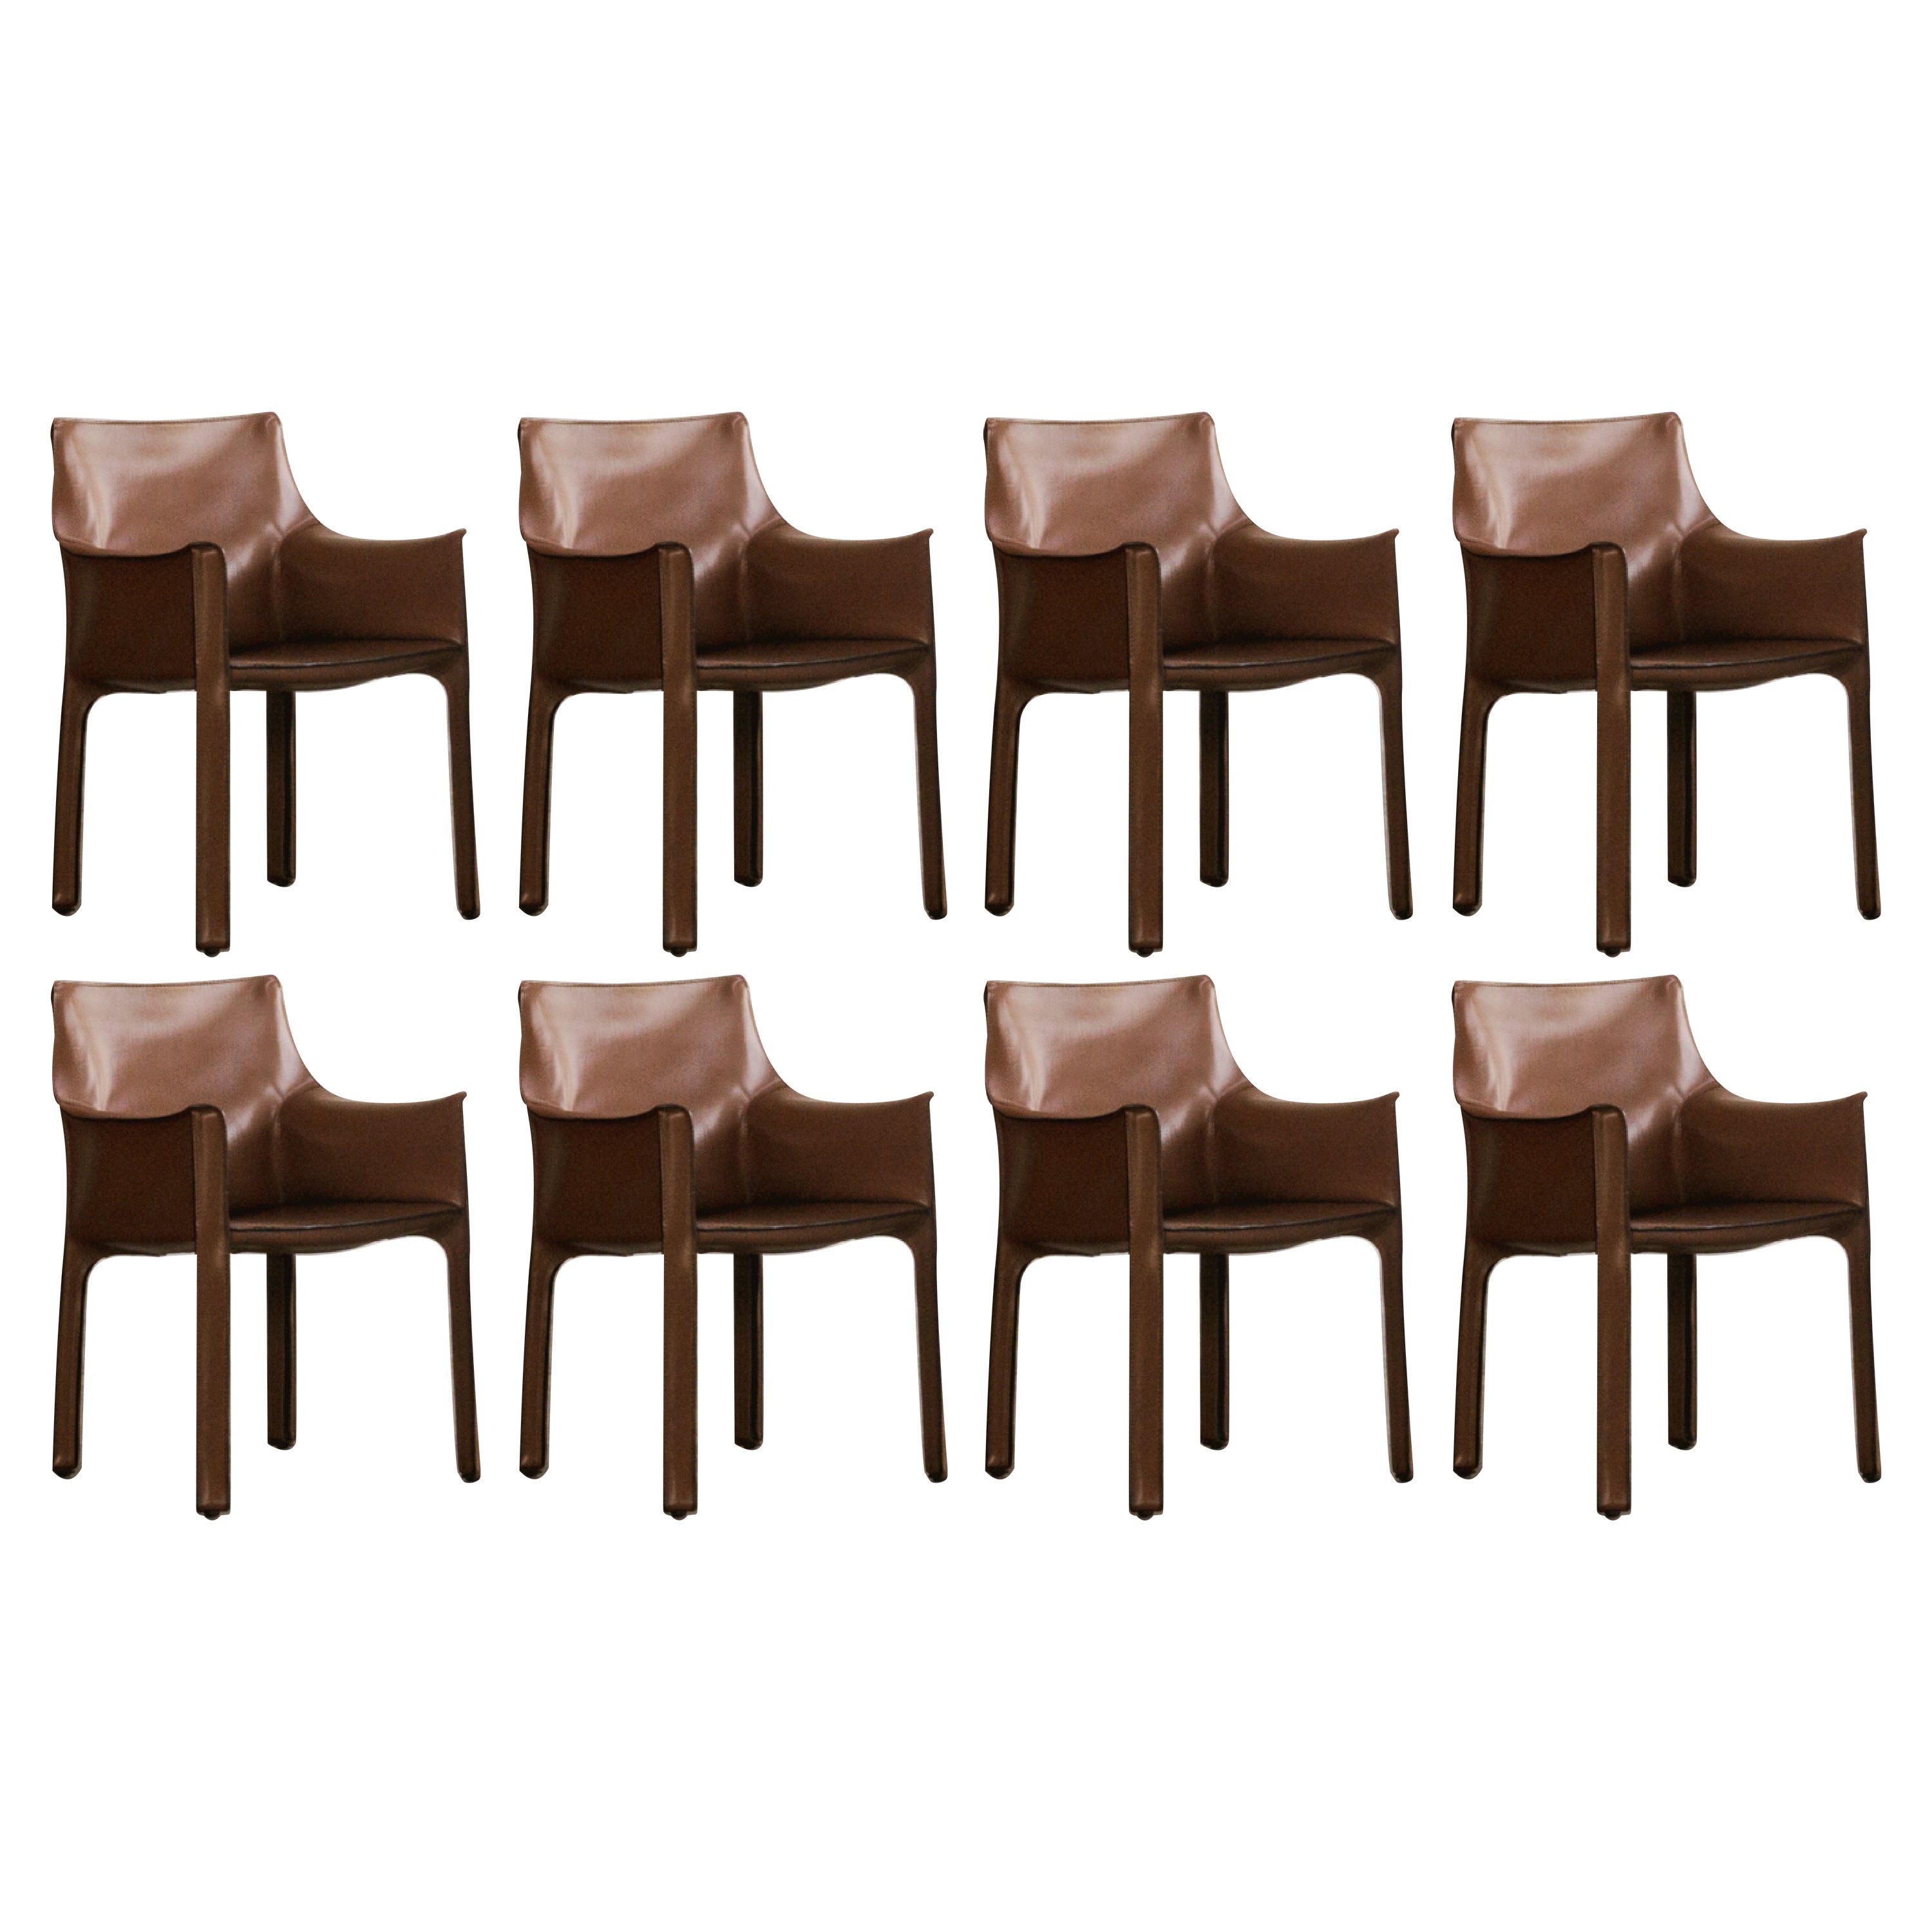 Mario Bellini "CAB 413” Dining Chairs for Cassina, 1977, Set of 8